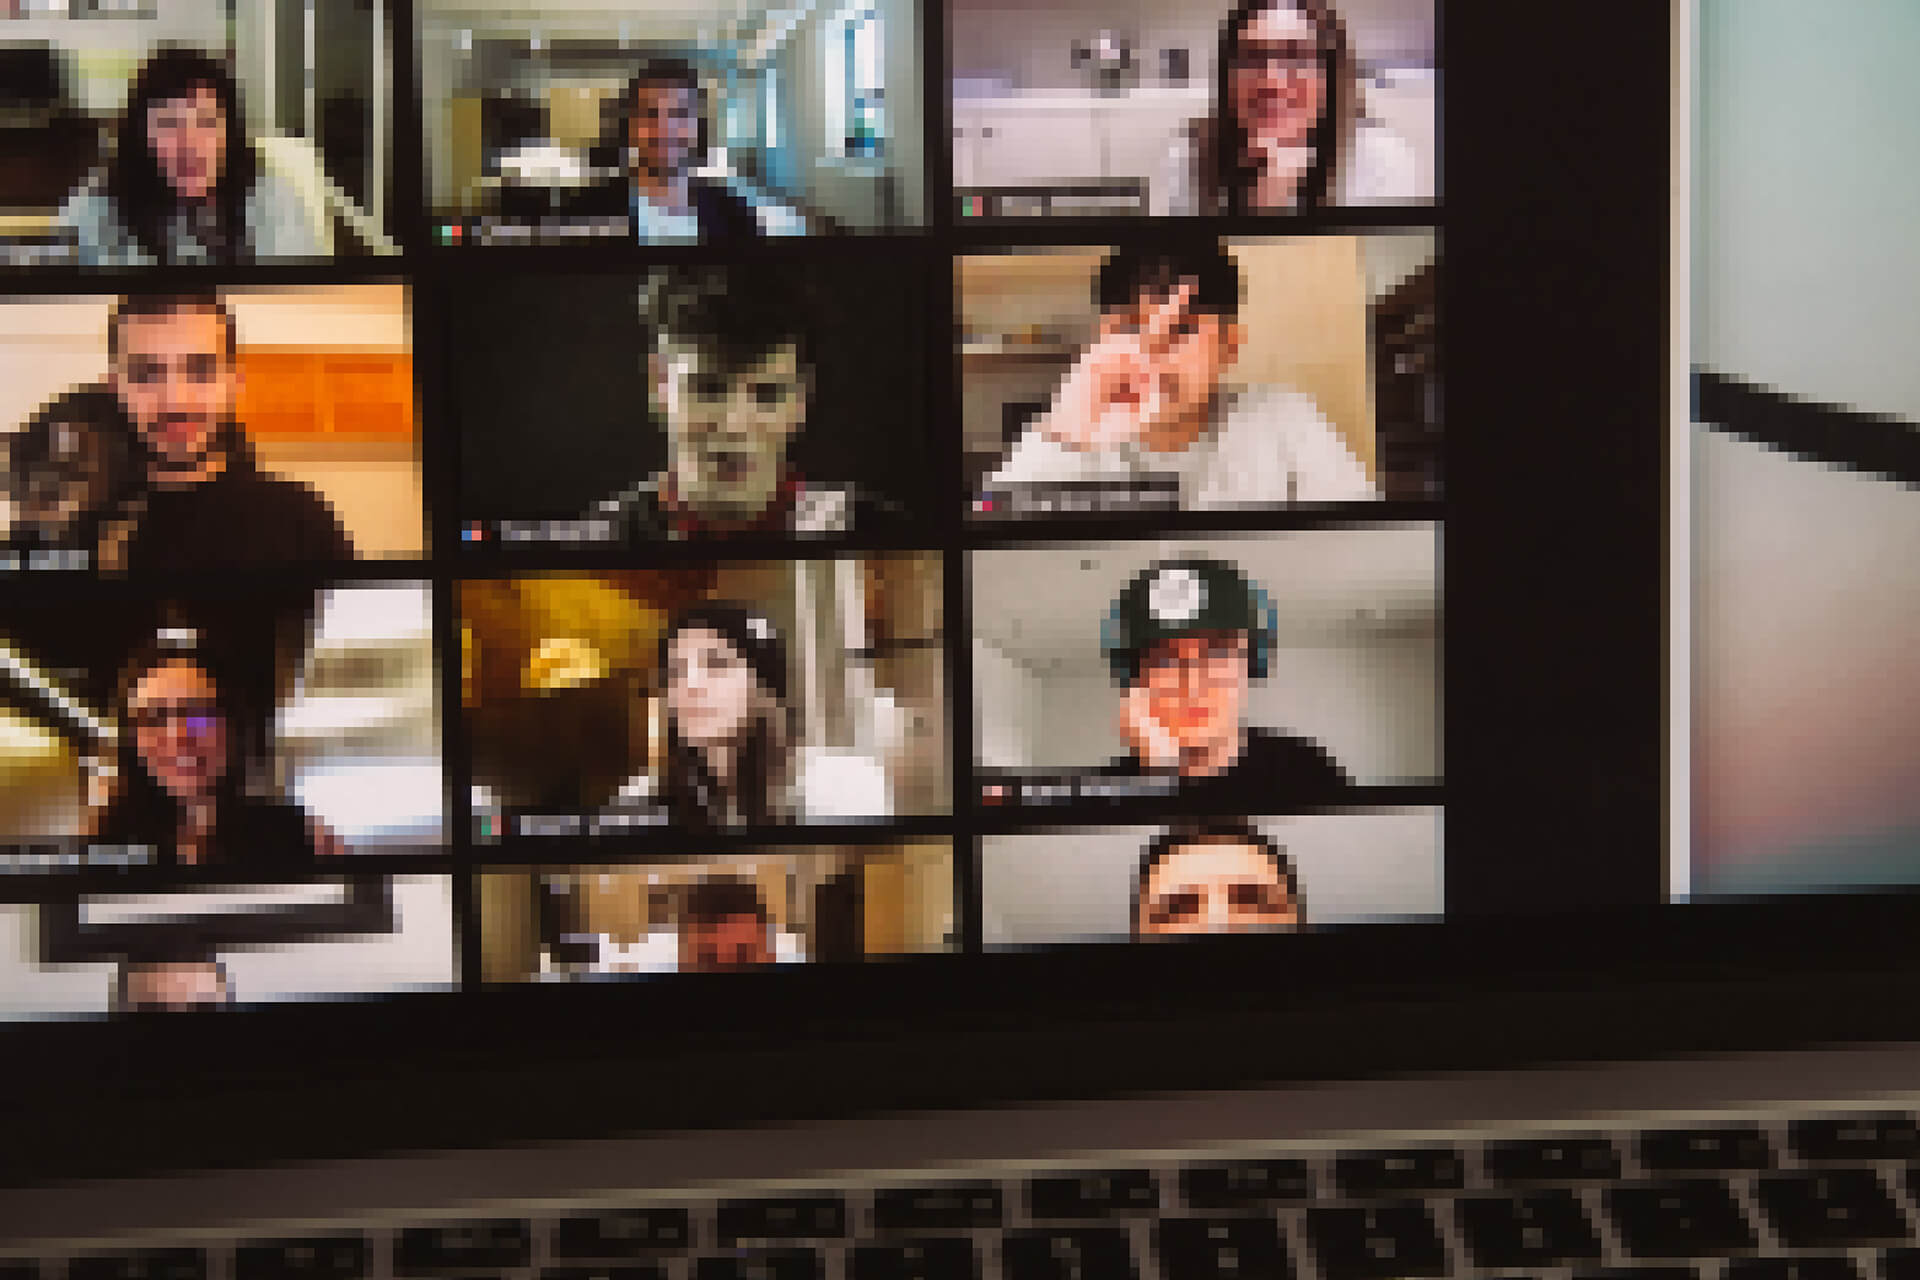 A pixelated video call